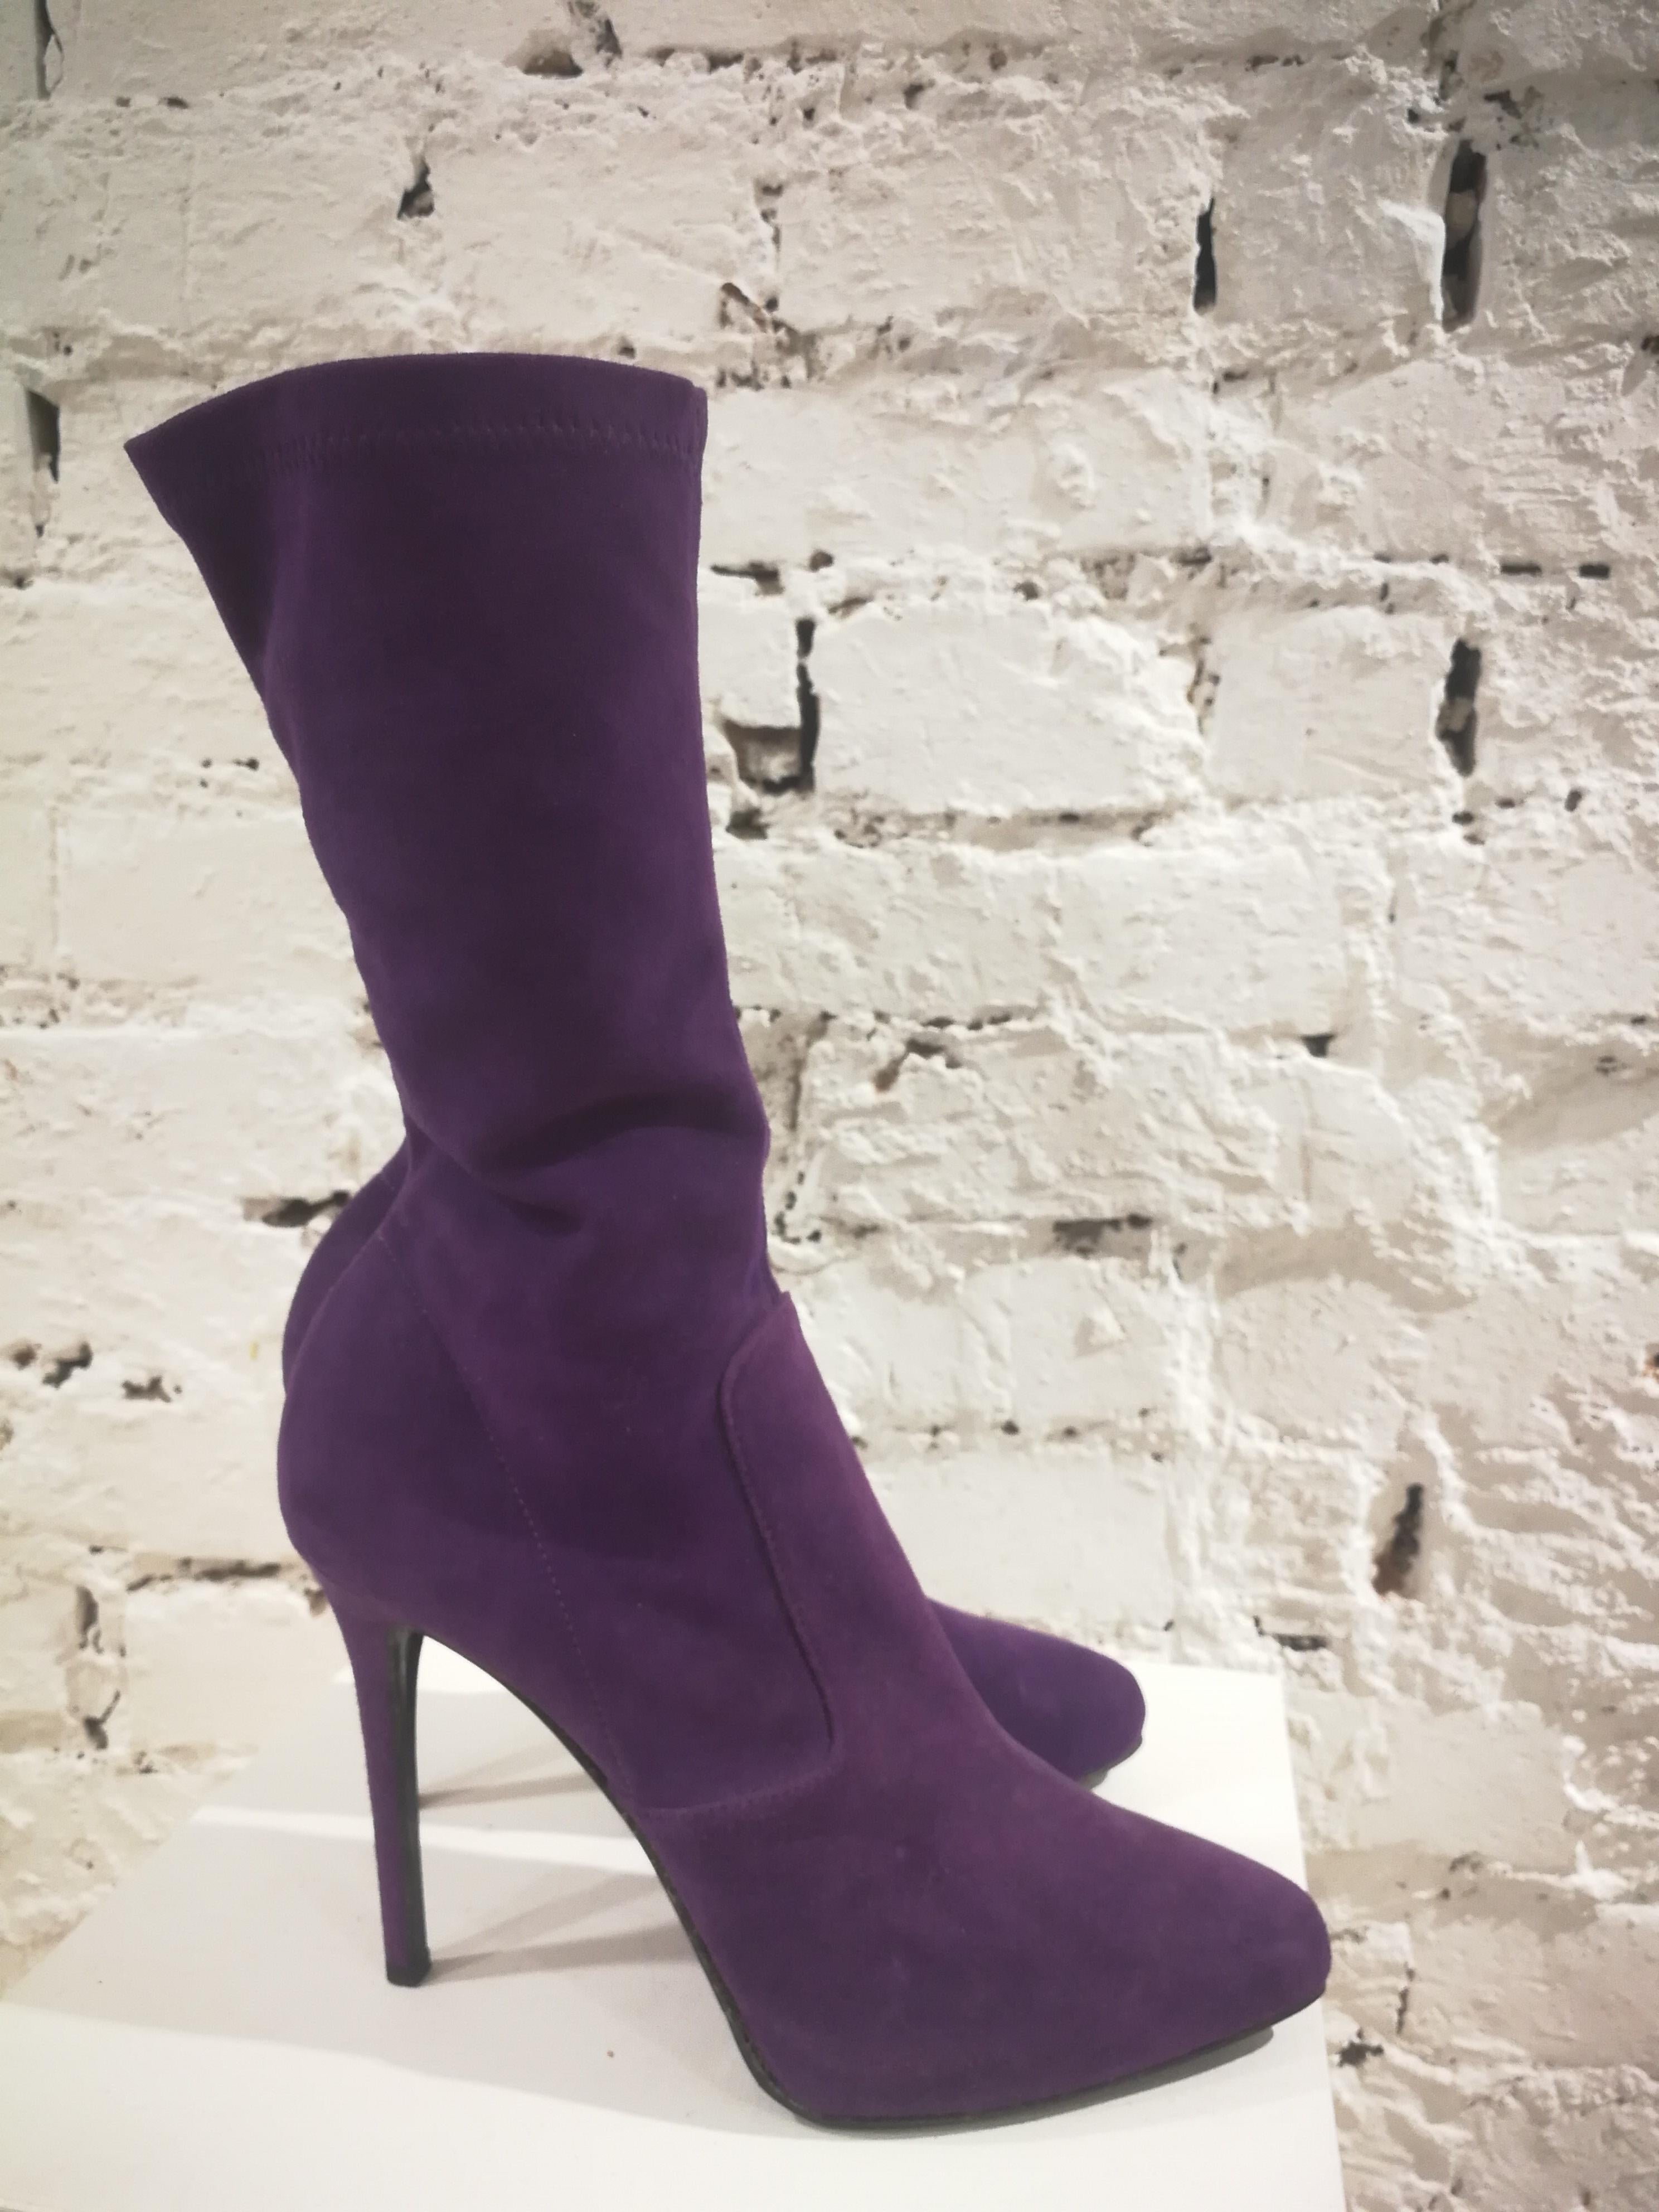 suede purple boots